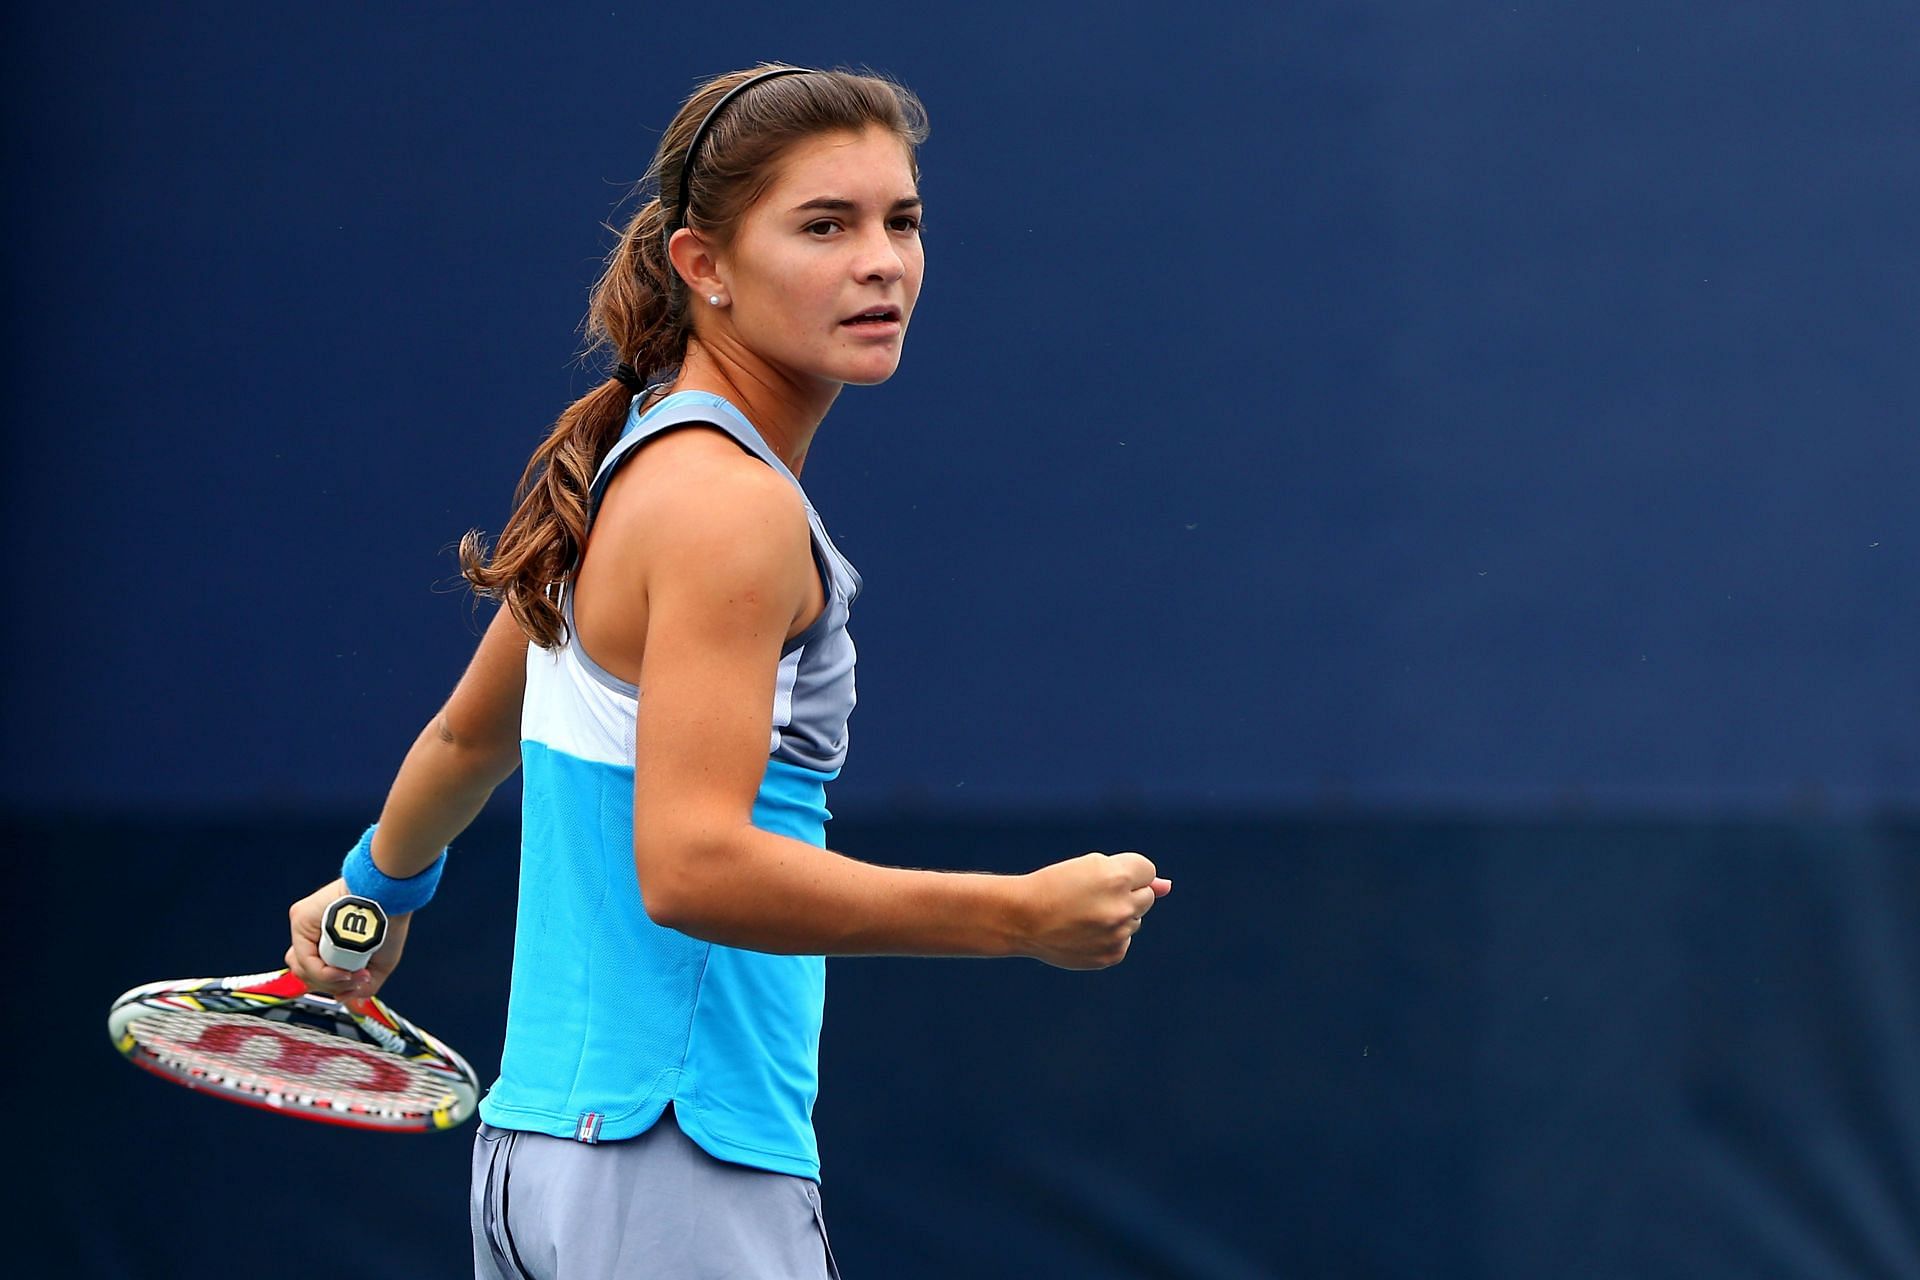 Marcela Zacarias is a former World No. 7 on the ITF juniors circuit